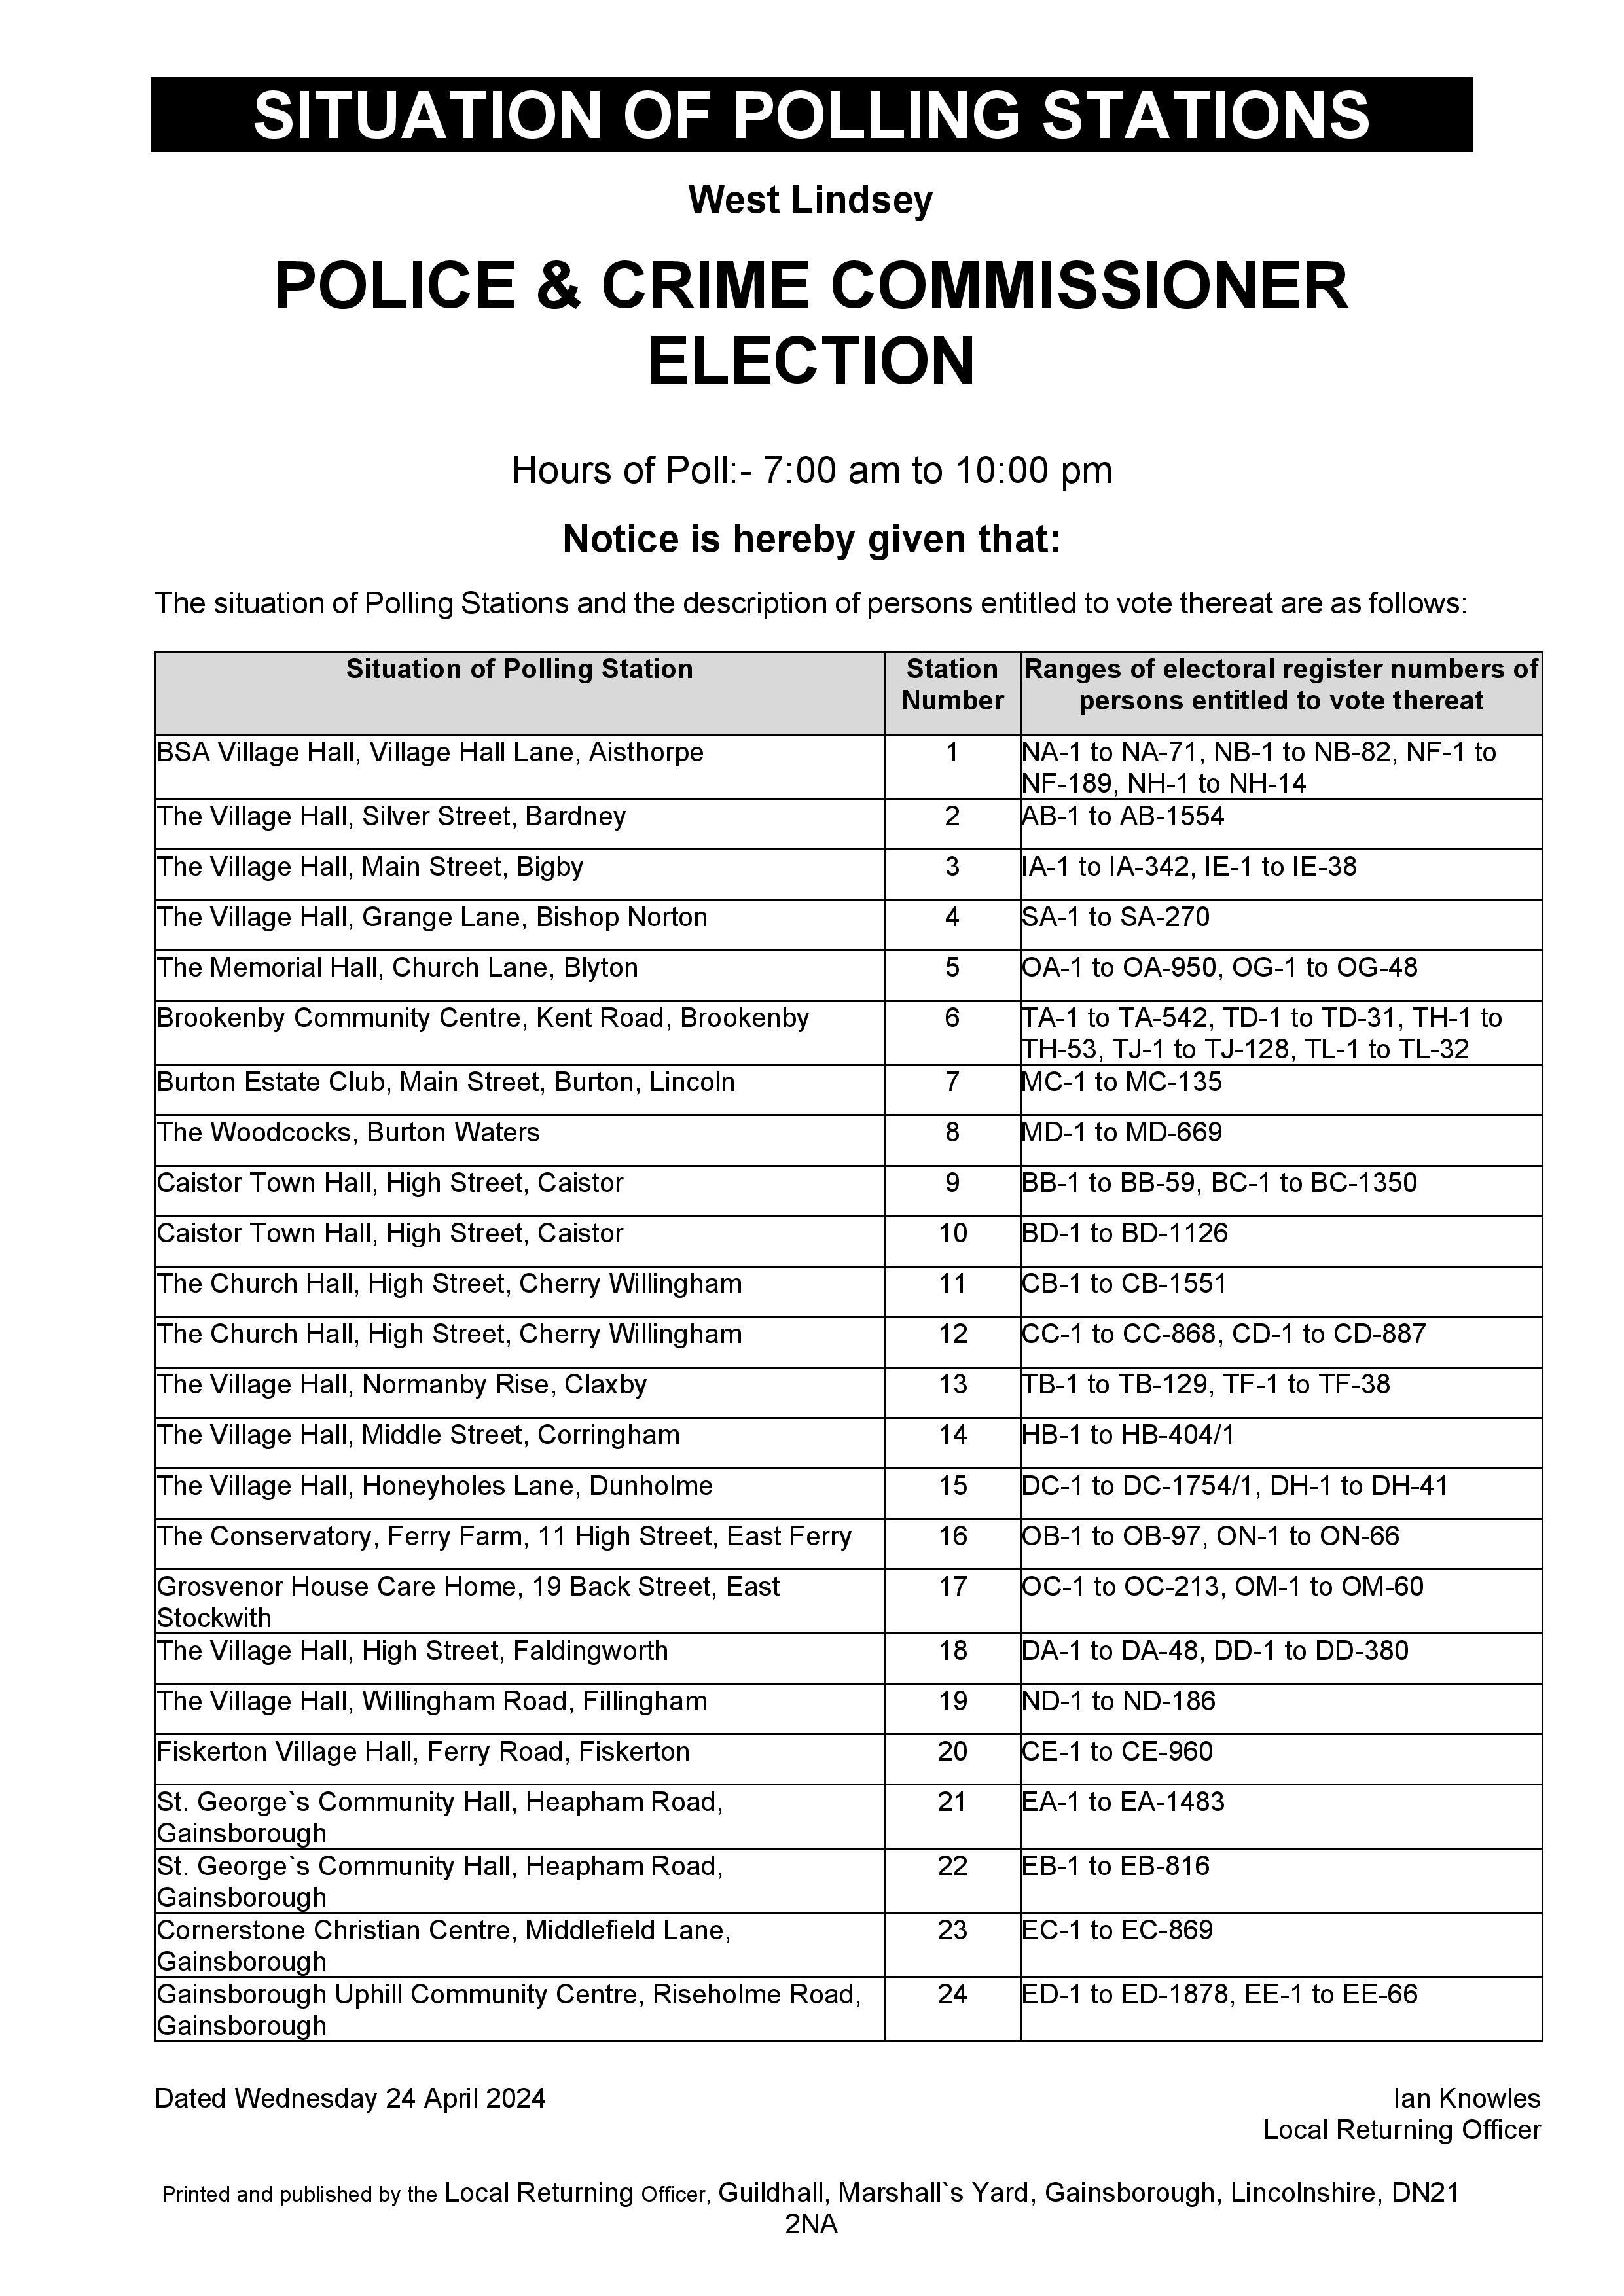 Notice of situation of polling stations 1